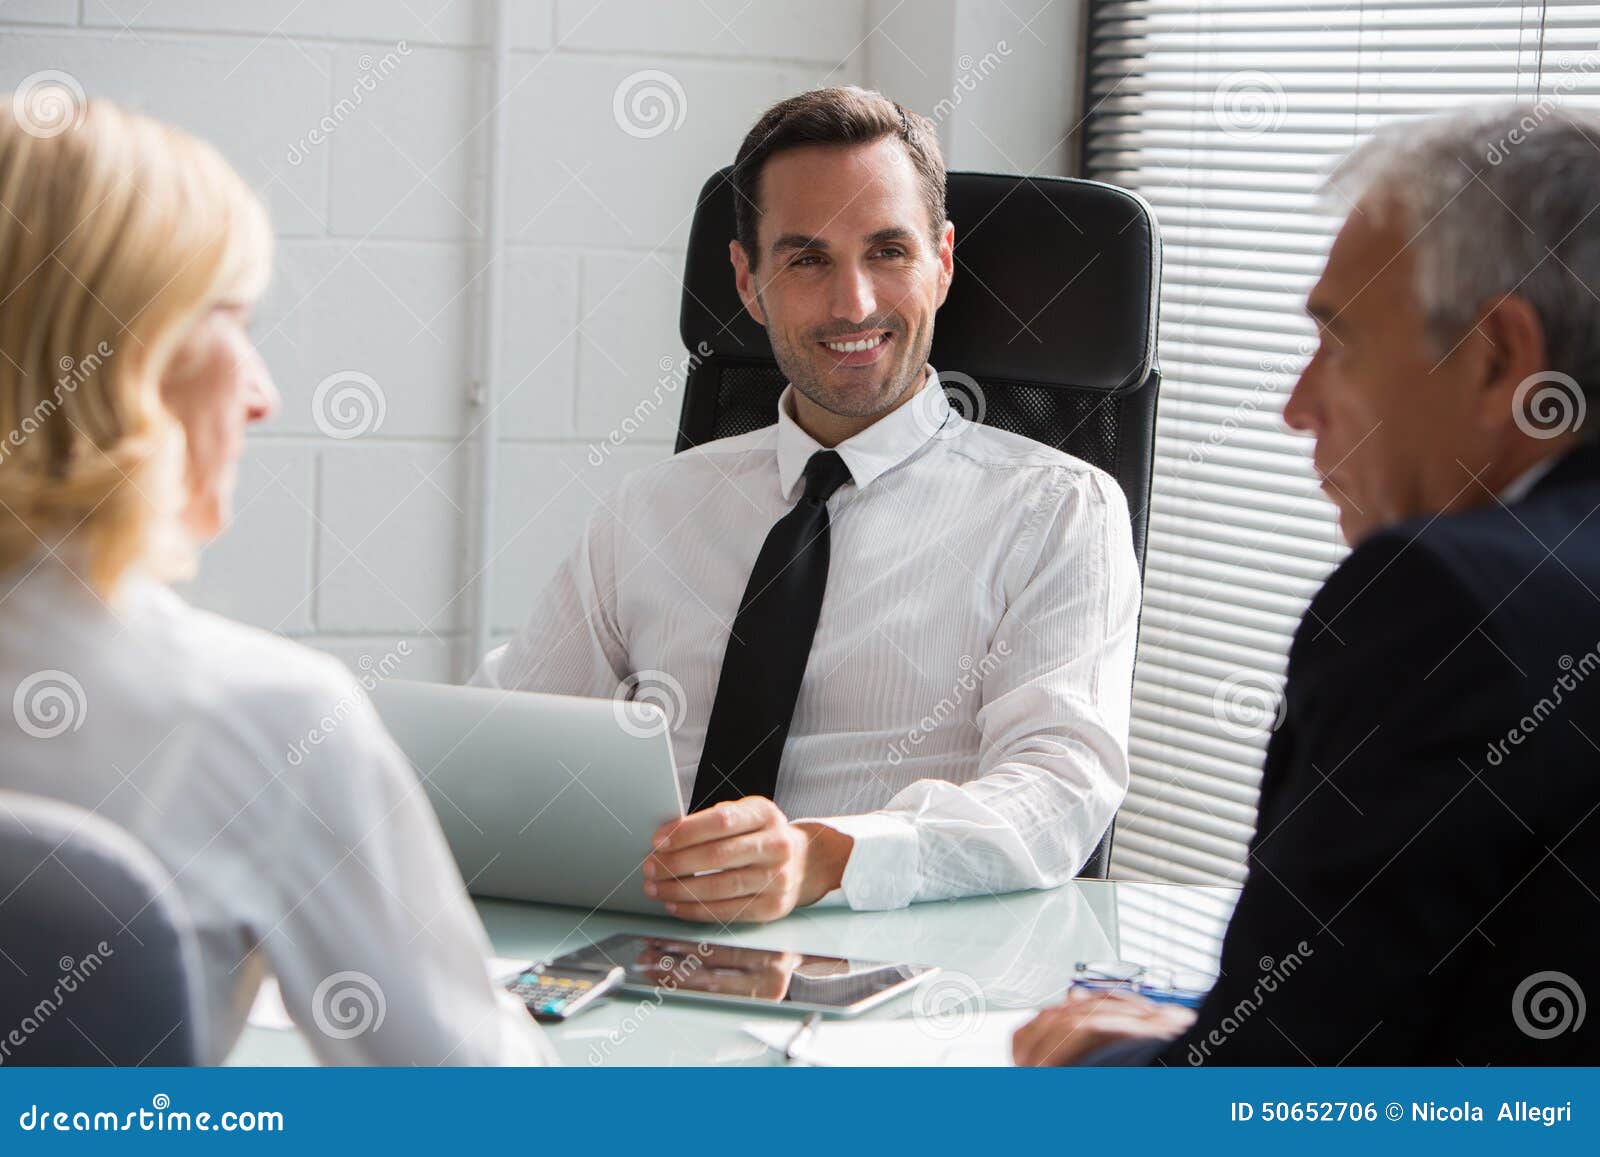 three businesspeople having a meeting in the office